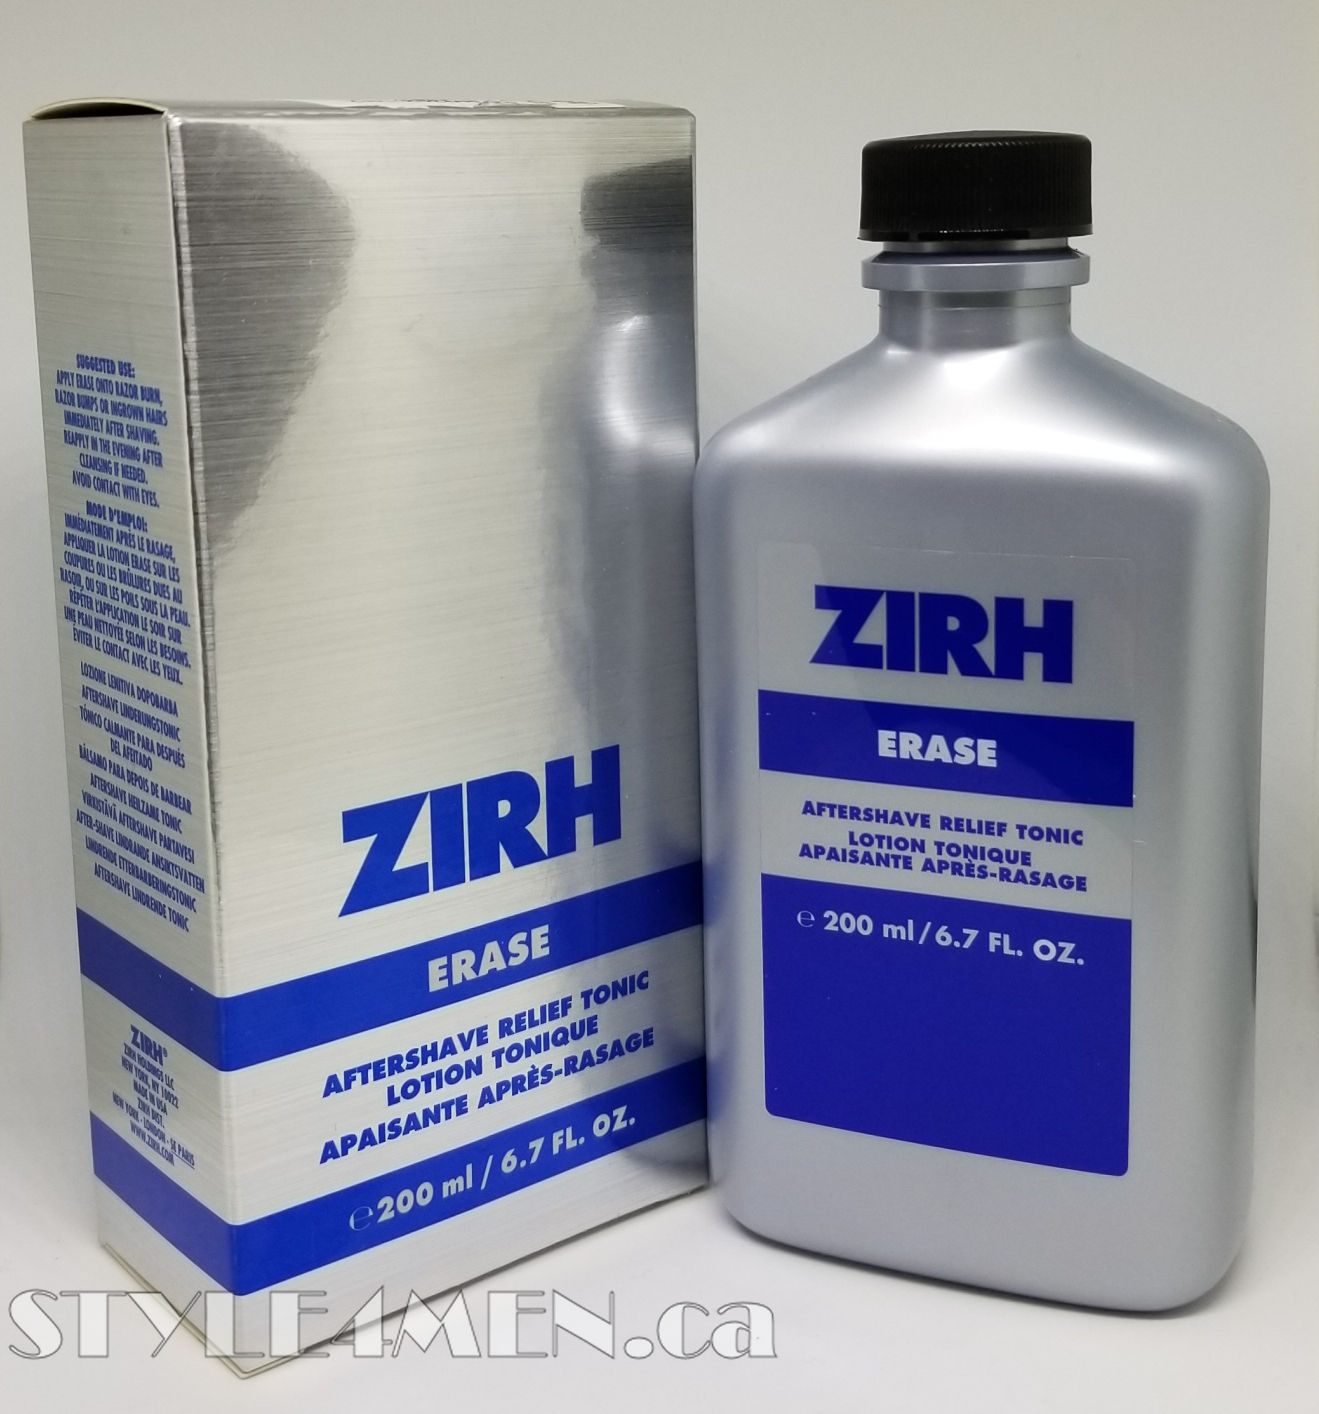 ZIRH Erase Aftershave Relief Tonic – A non-alcoholic liquid solution